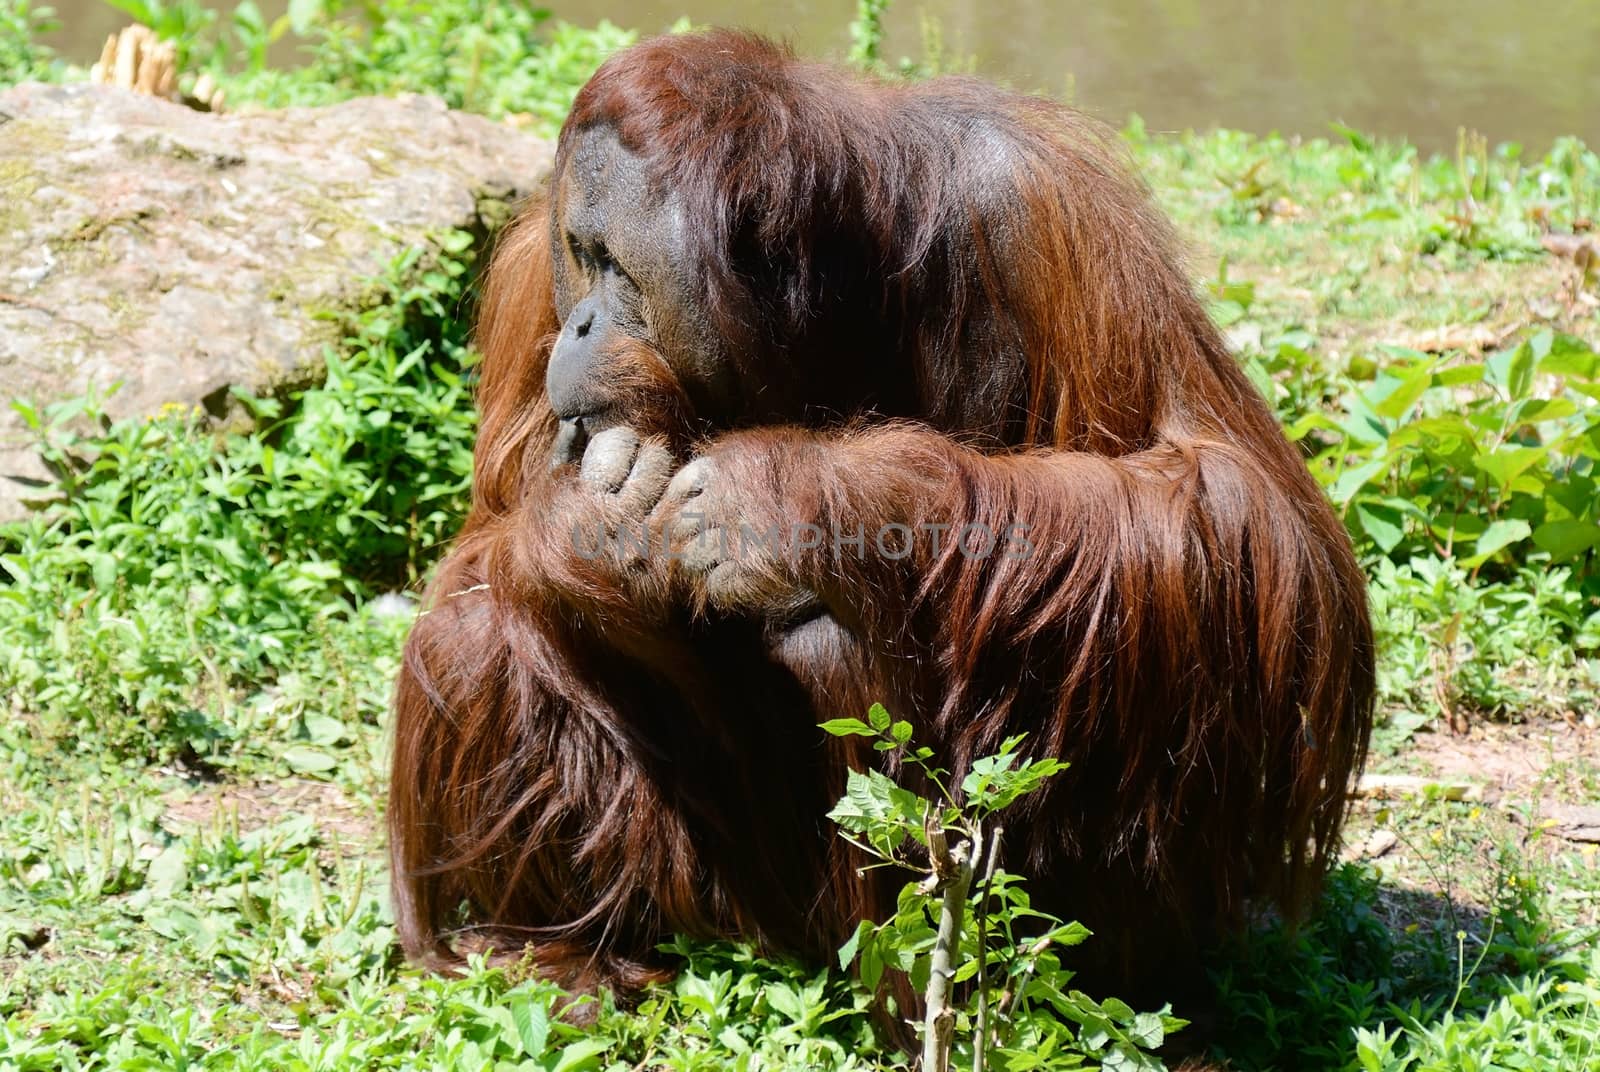 A lone male orangutan sitting on an island looking thoughtful with long hair